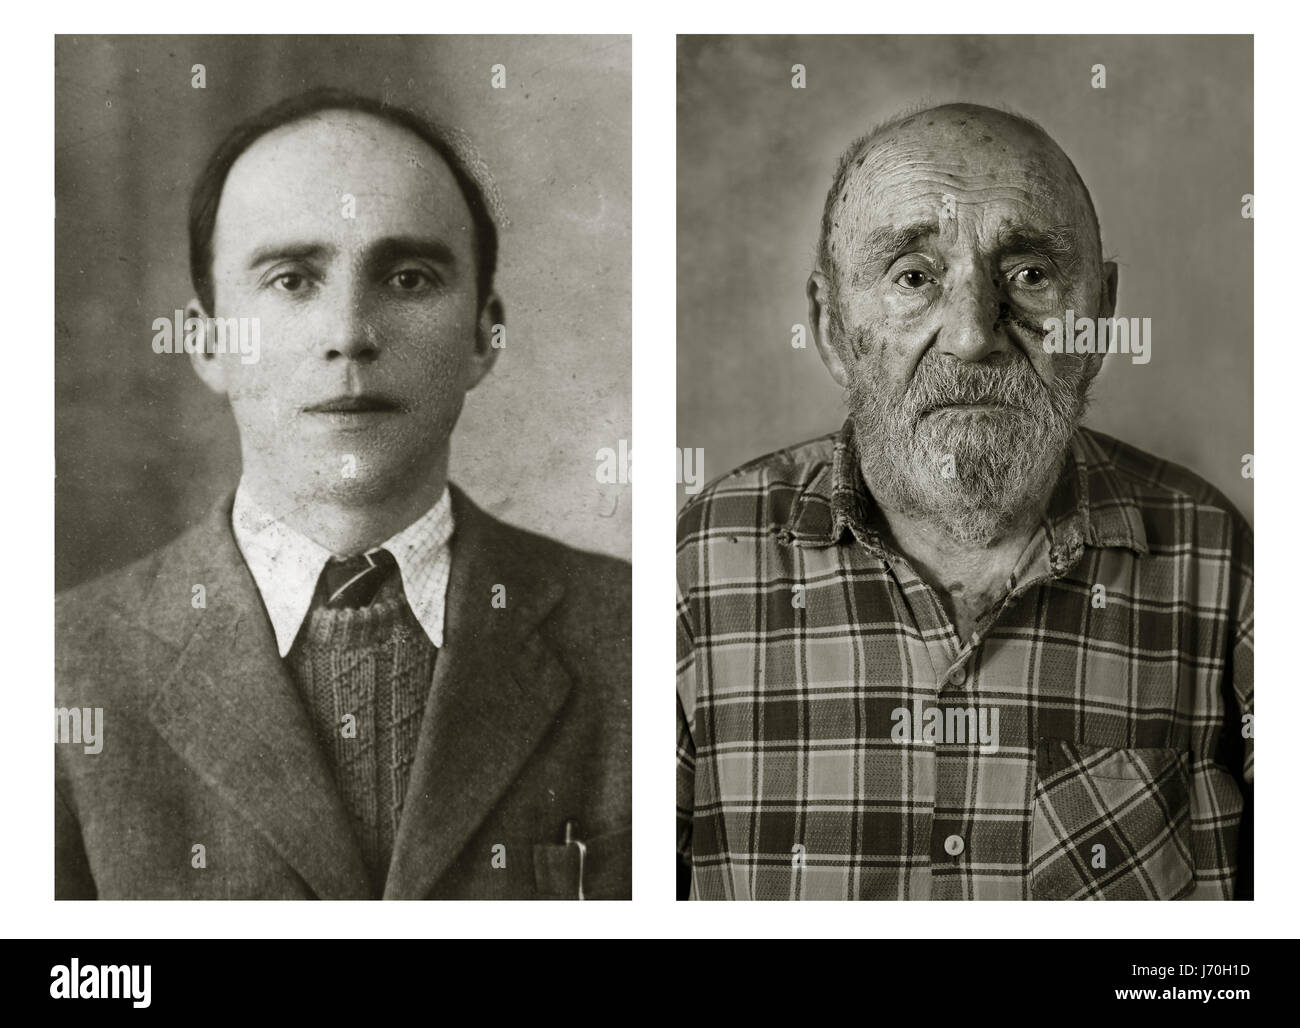 Vincenc Jetelina. Left: 30 years old, right: 105 years old. HE was a construction worker and now lives in his own home in South Moravia village. He spent 8 years in prison for being a district commissioner during WW2. POIGNANT portraits have posed centenarians alongside their younger selves in a project called Faces of Century. The incredible images tell the unique stories of each person’s life including one woman who was in the truck that hit and killed high-ranking German Nazi official Reinhard Heydrich’s son Klaus in 1943. Another intriguing tale comes from a 101-year-old woman who decided  Stock Photo